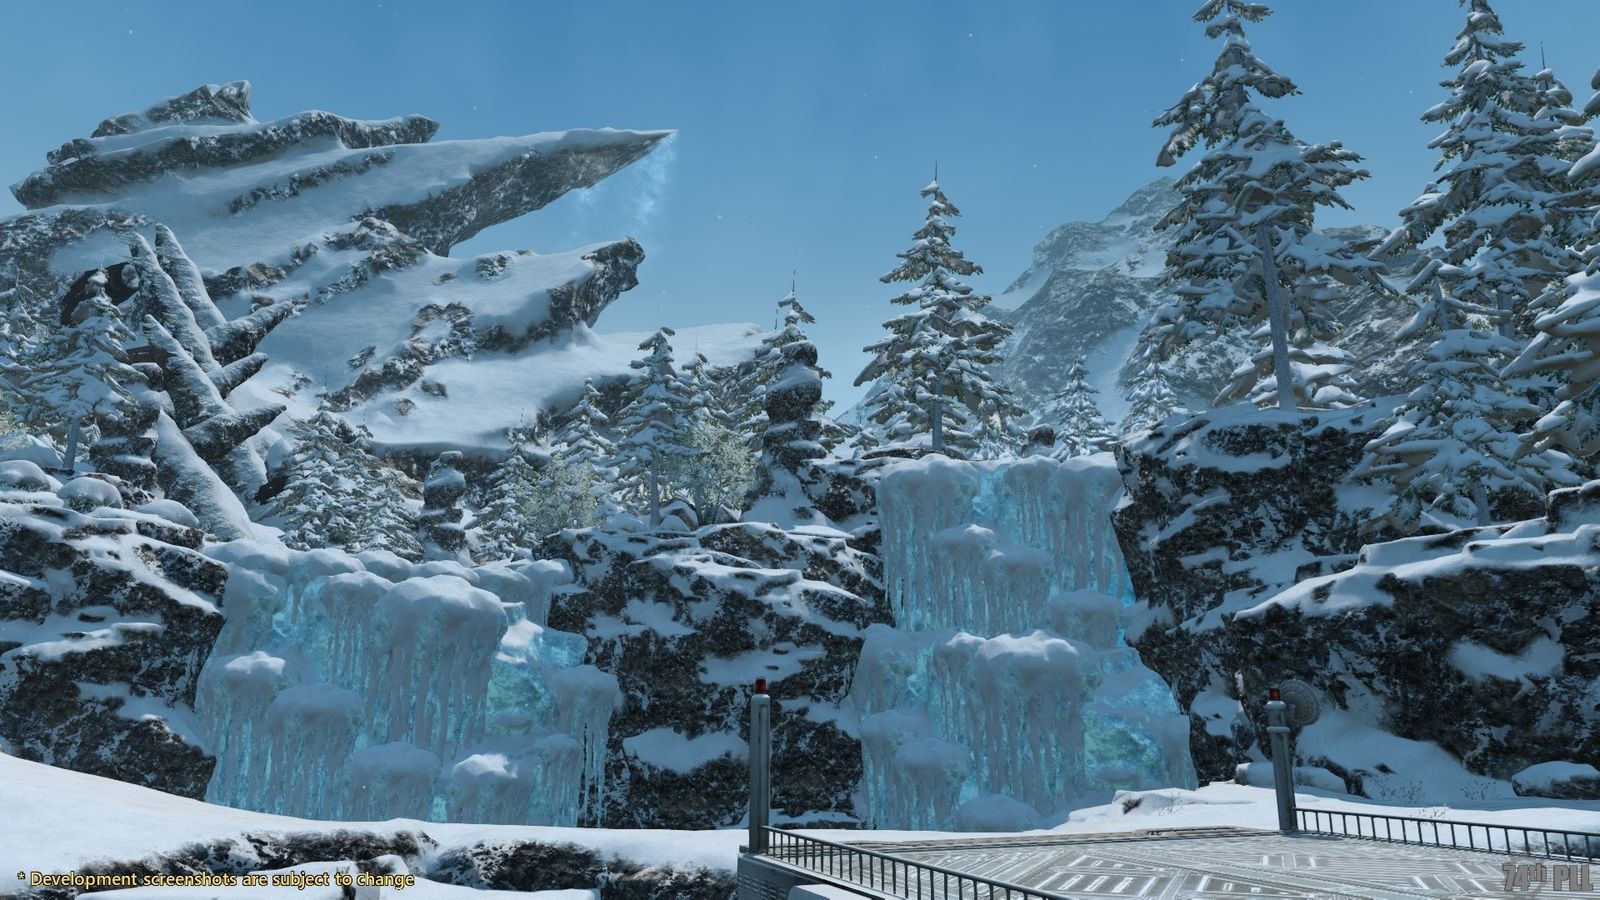 Lapis Manalis, a snowy dungeon, arrives in FFXIV 6.3.